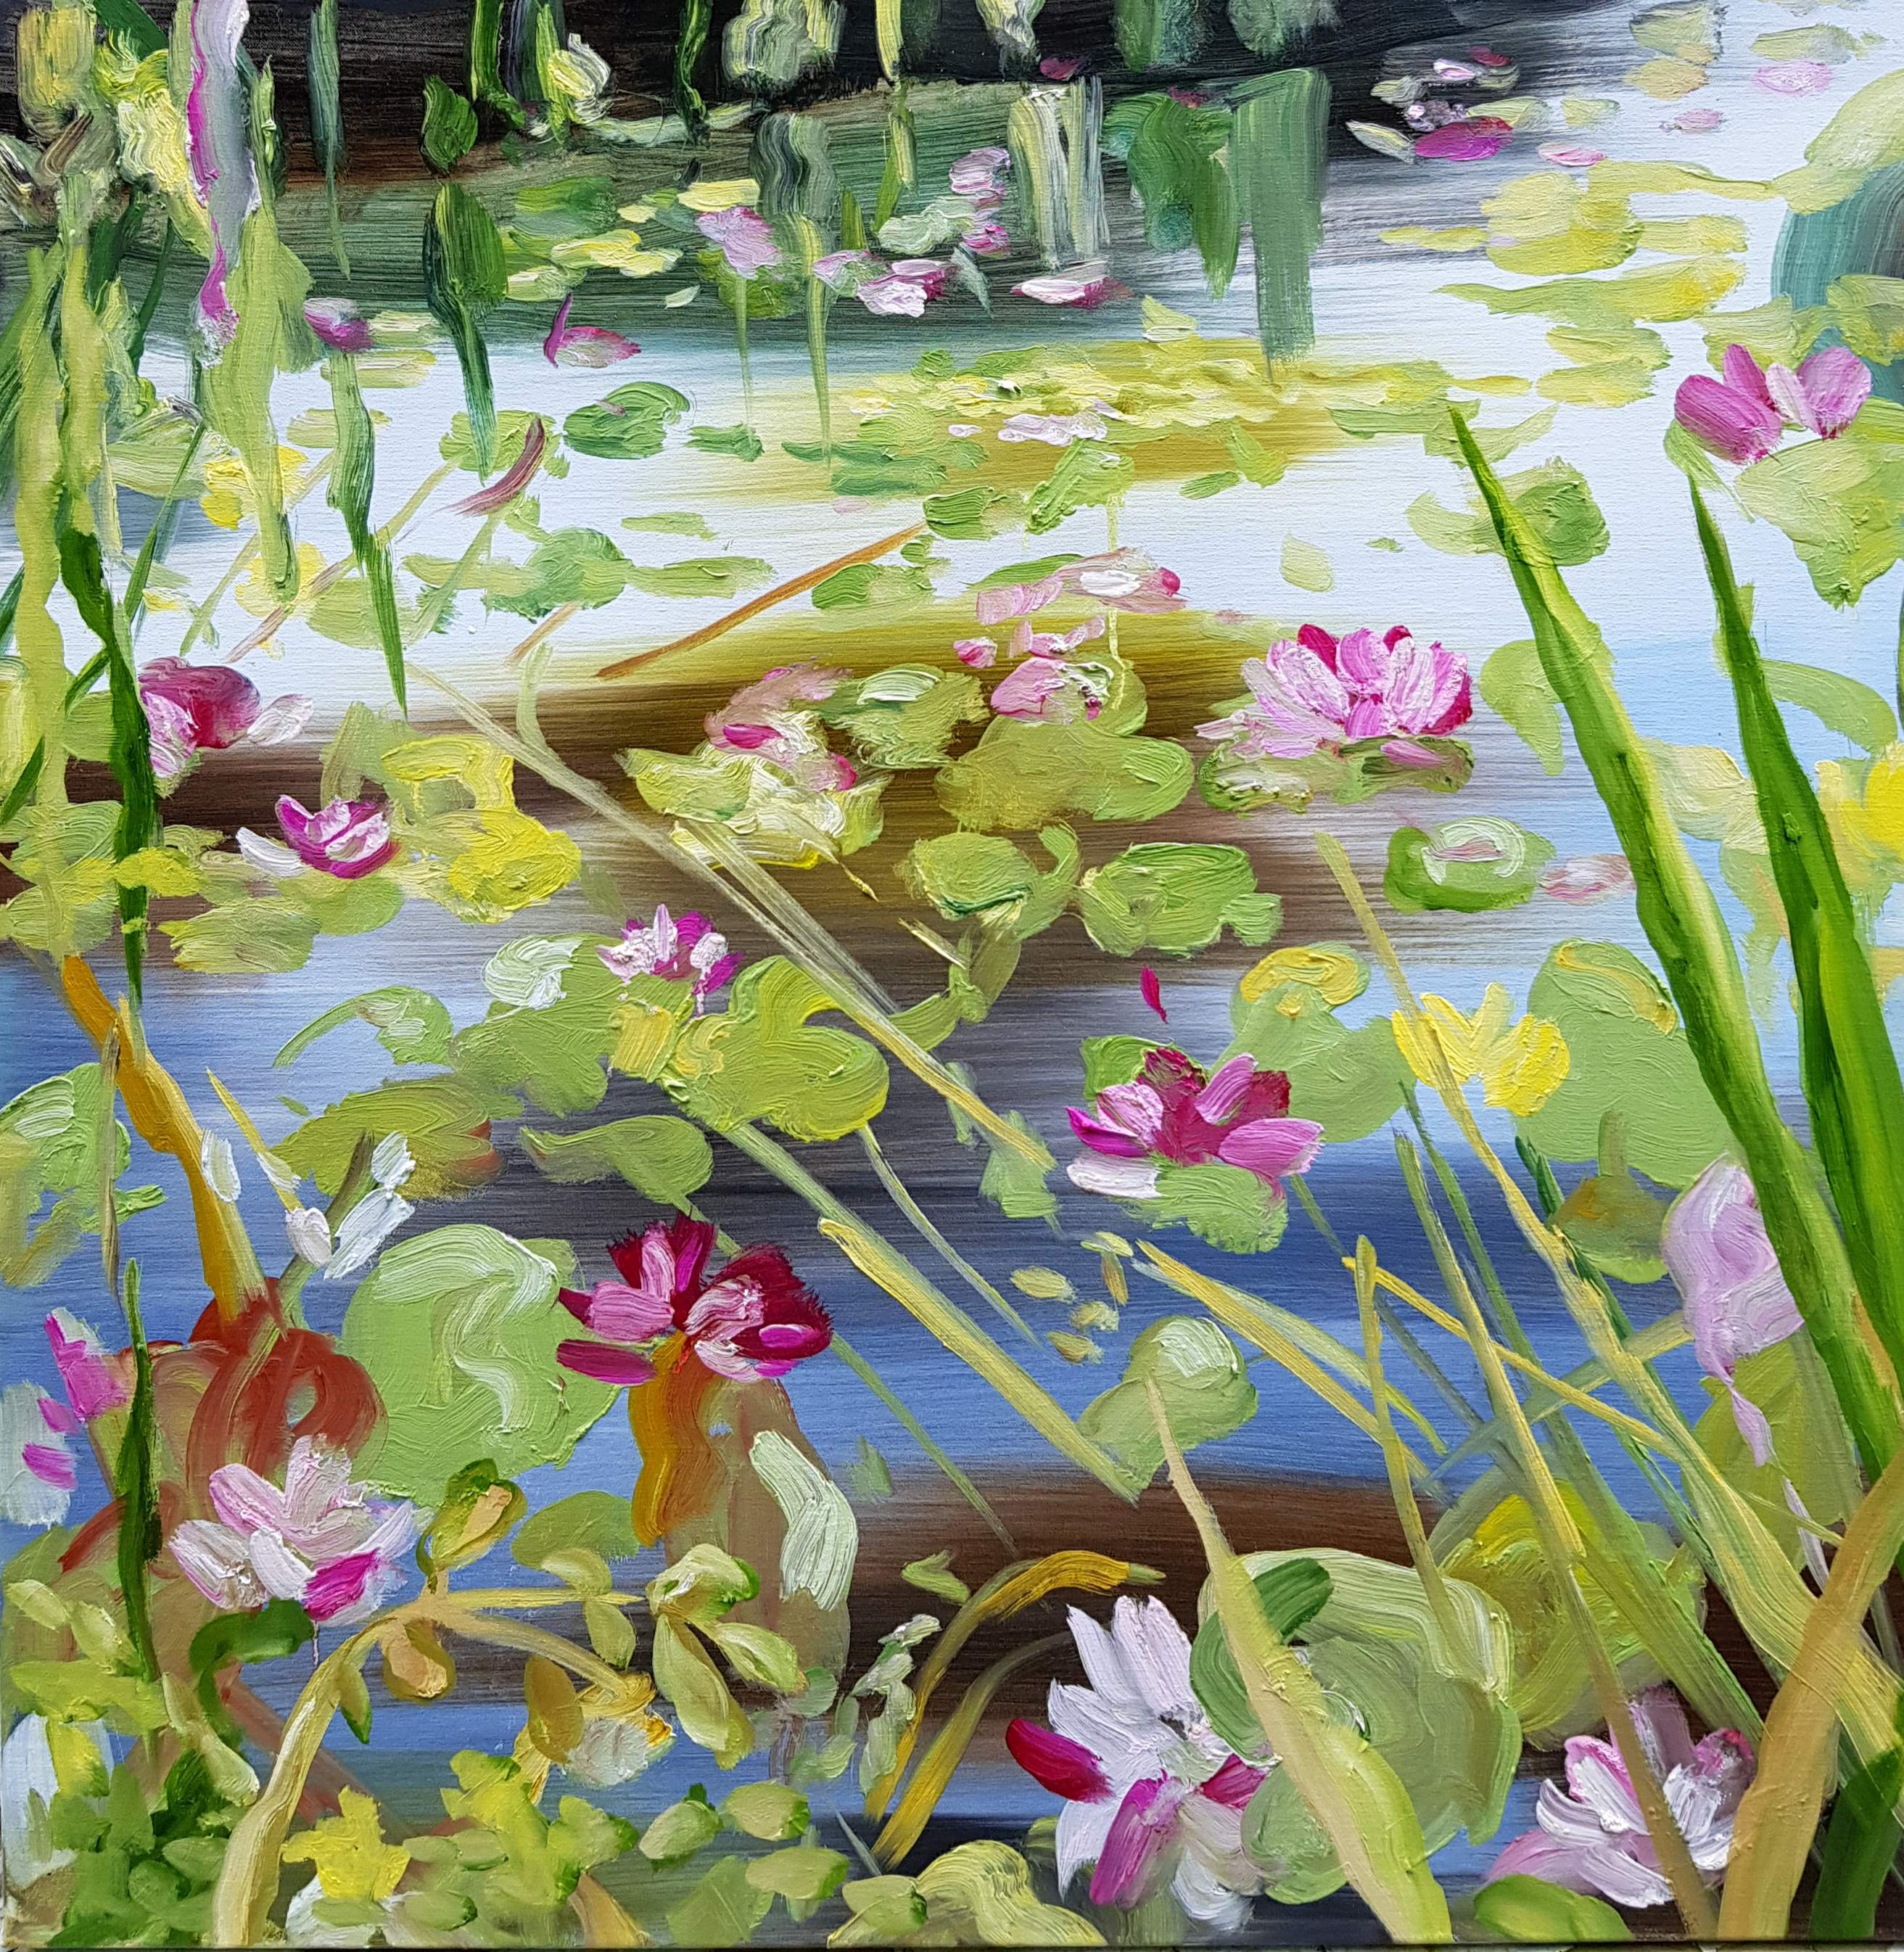 The water lilies l